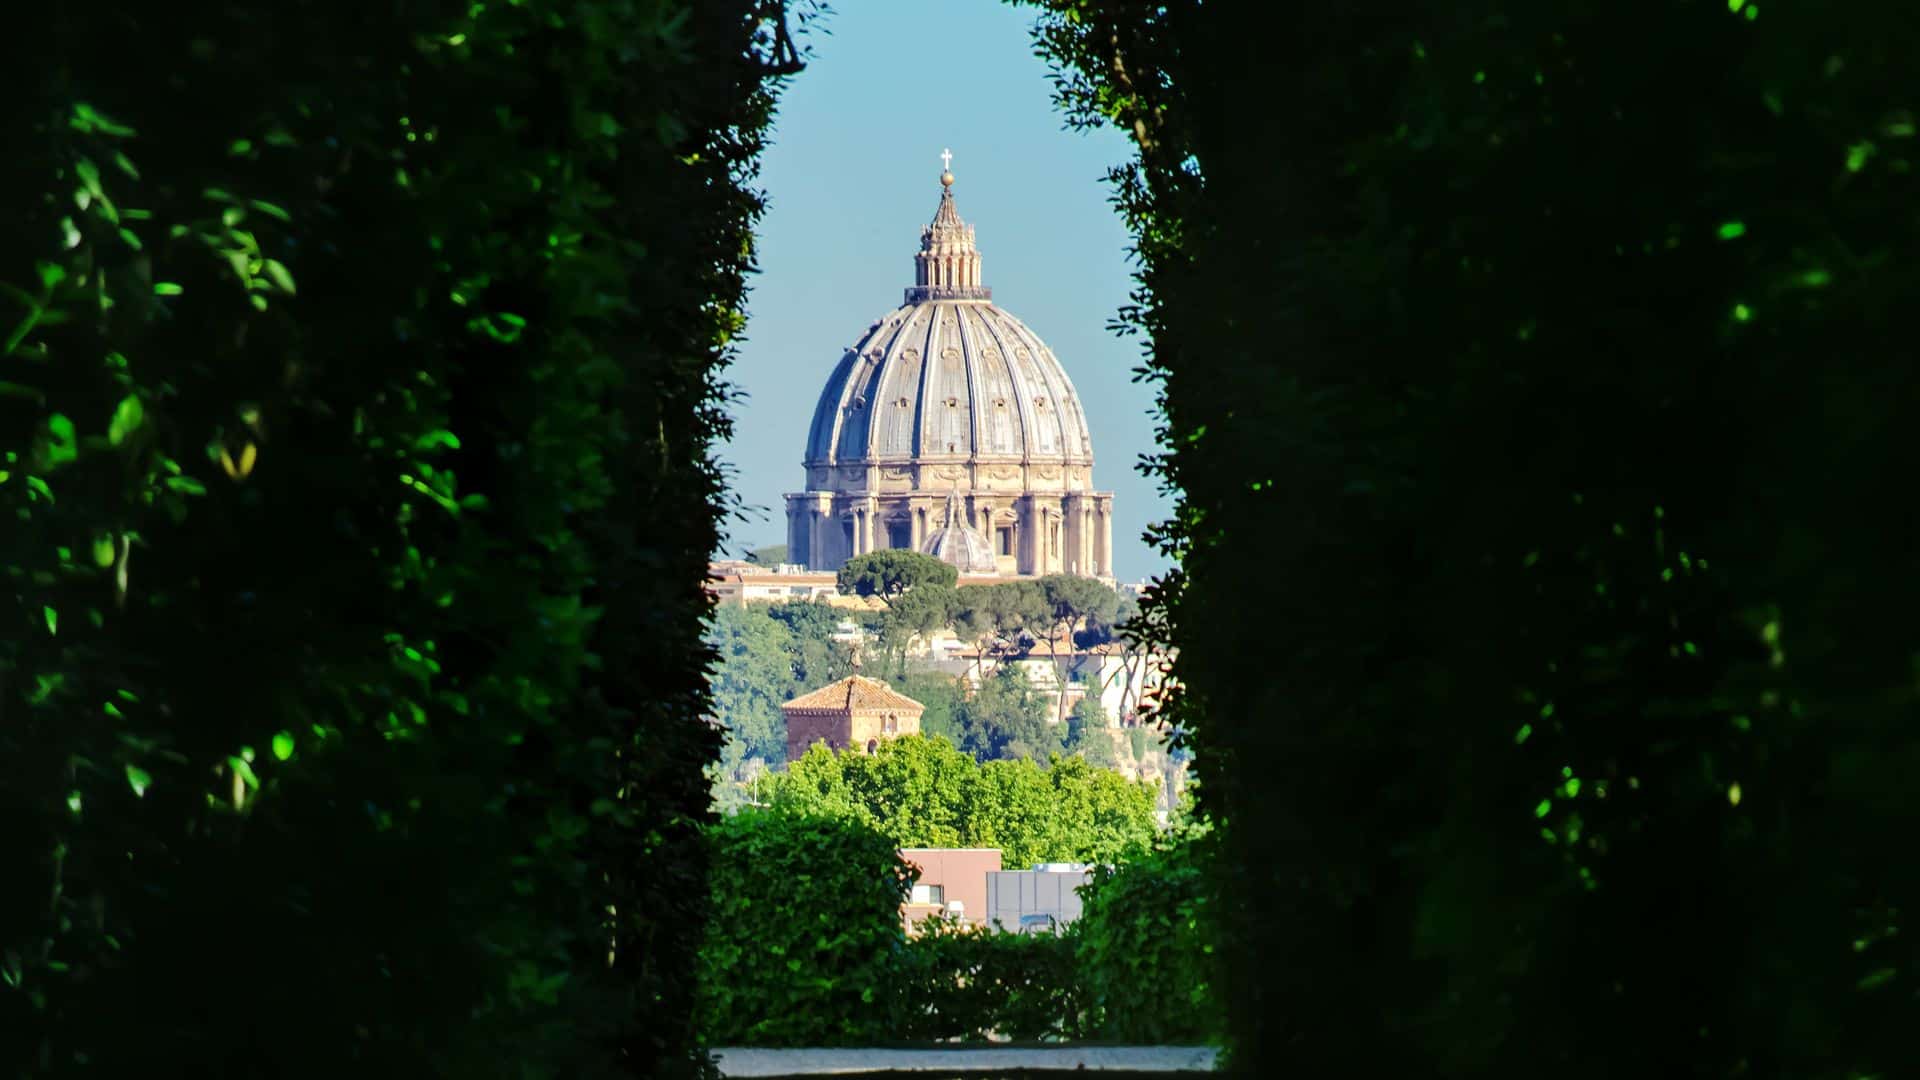 A view of St. Peter's Basilica framed by hedges from the Aventine Keyhole.